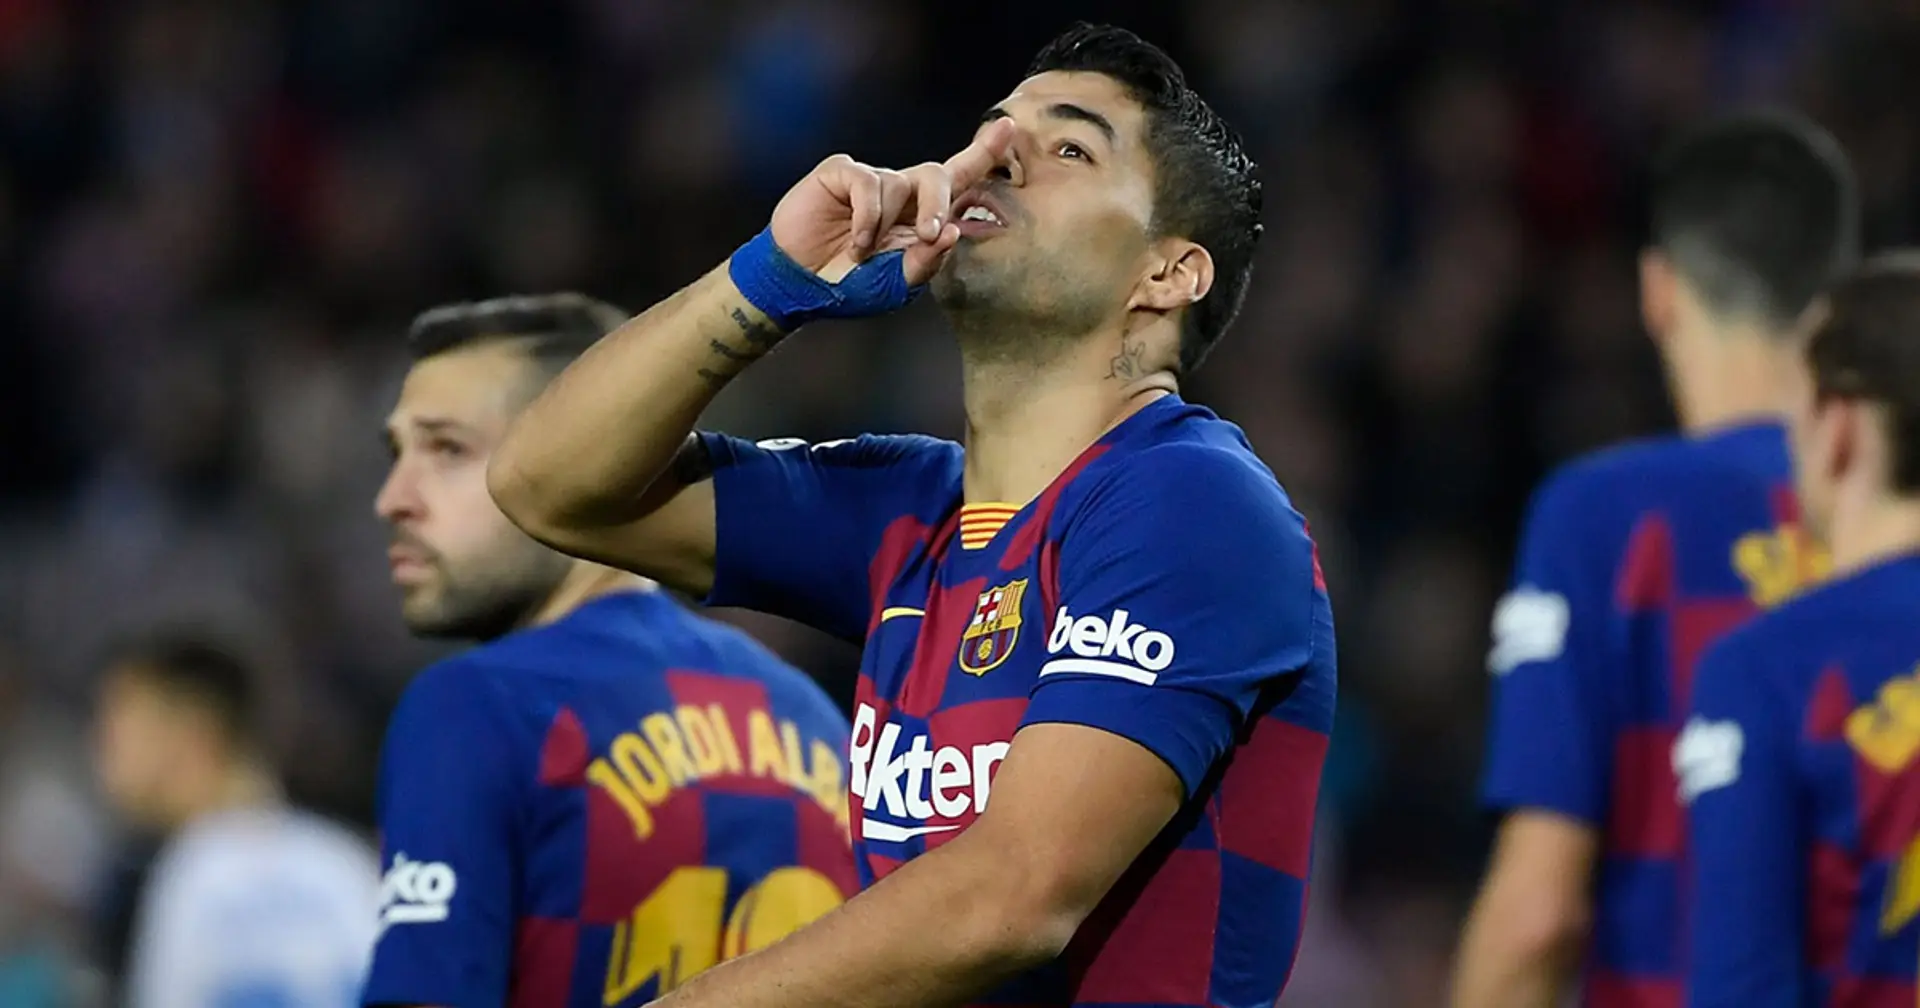 More than just a goalscorer: Luis Suarez tops list of most creative strikers across Europe's top 5 leagues